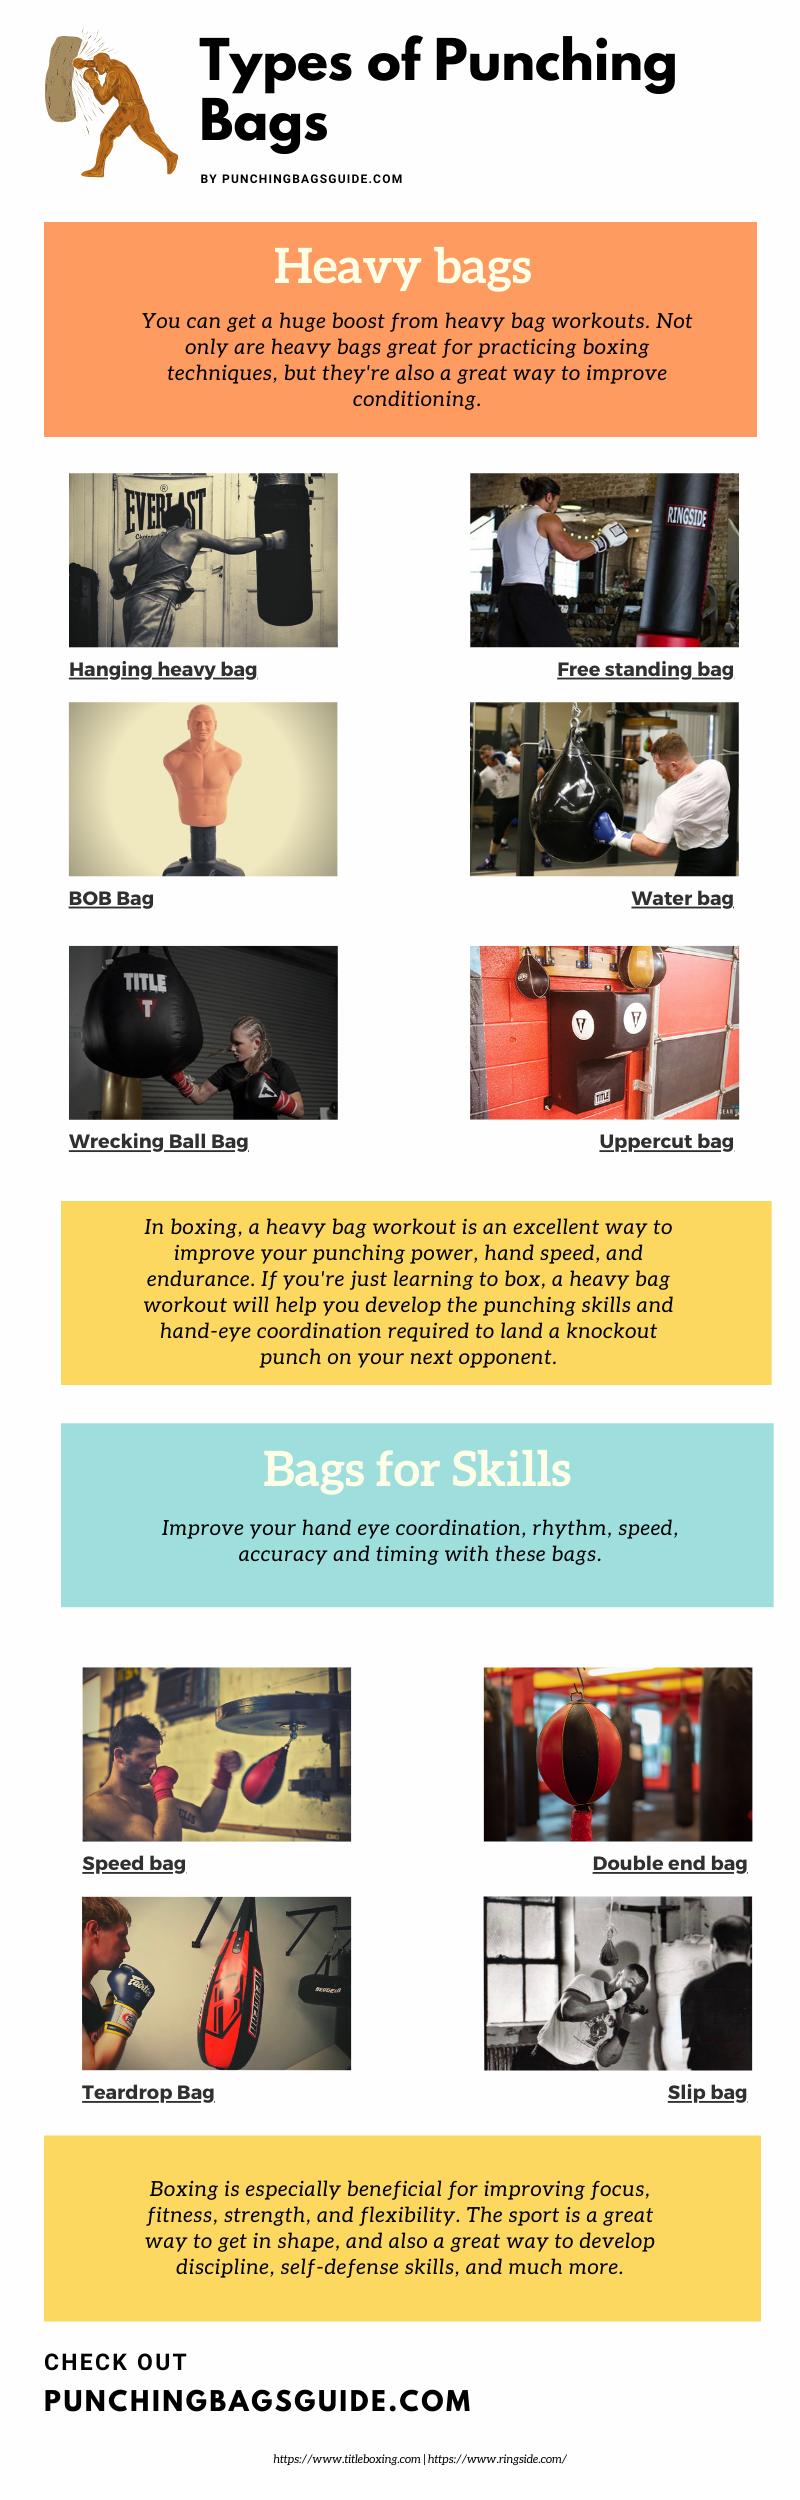 differet types of punhcing bags